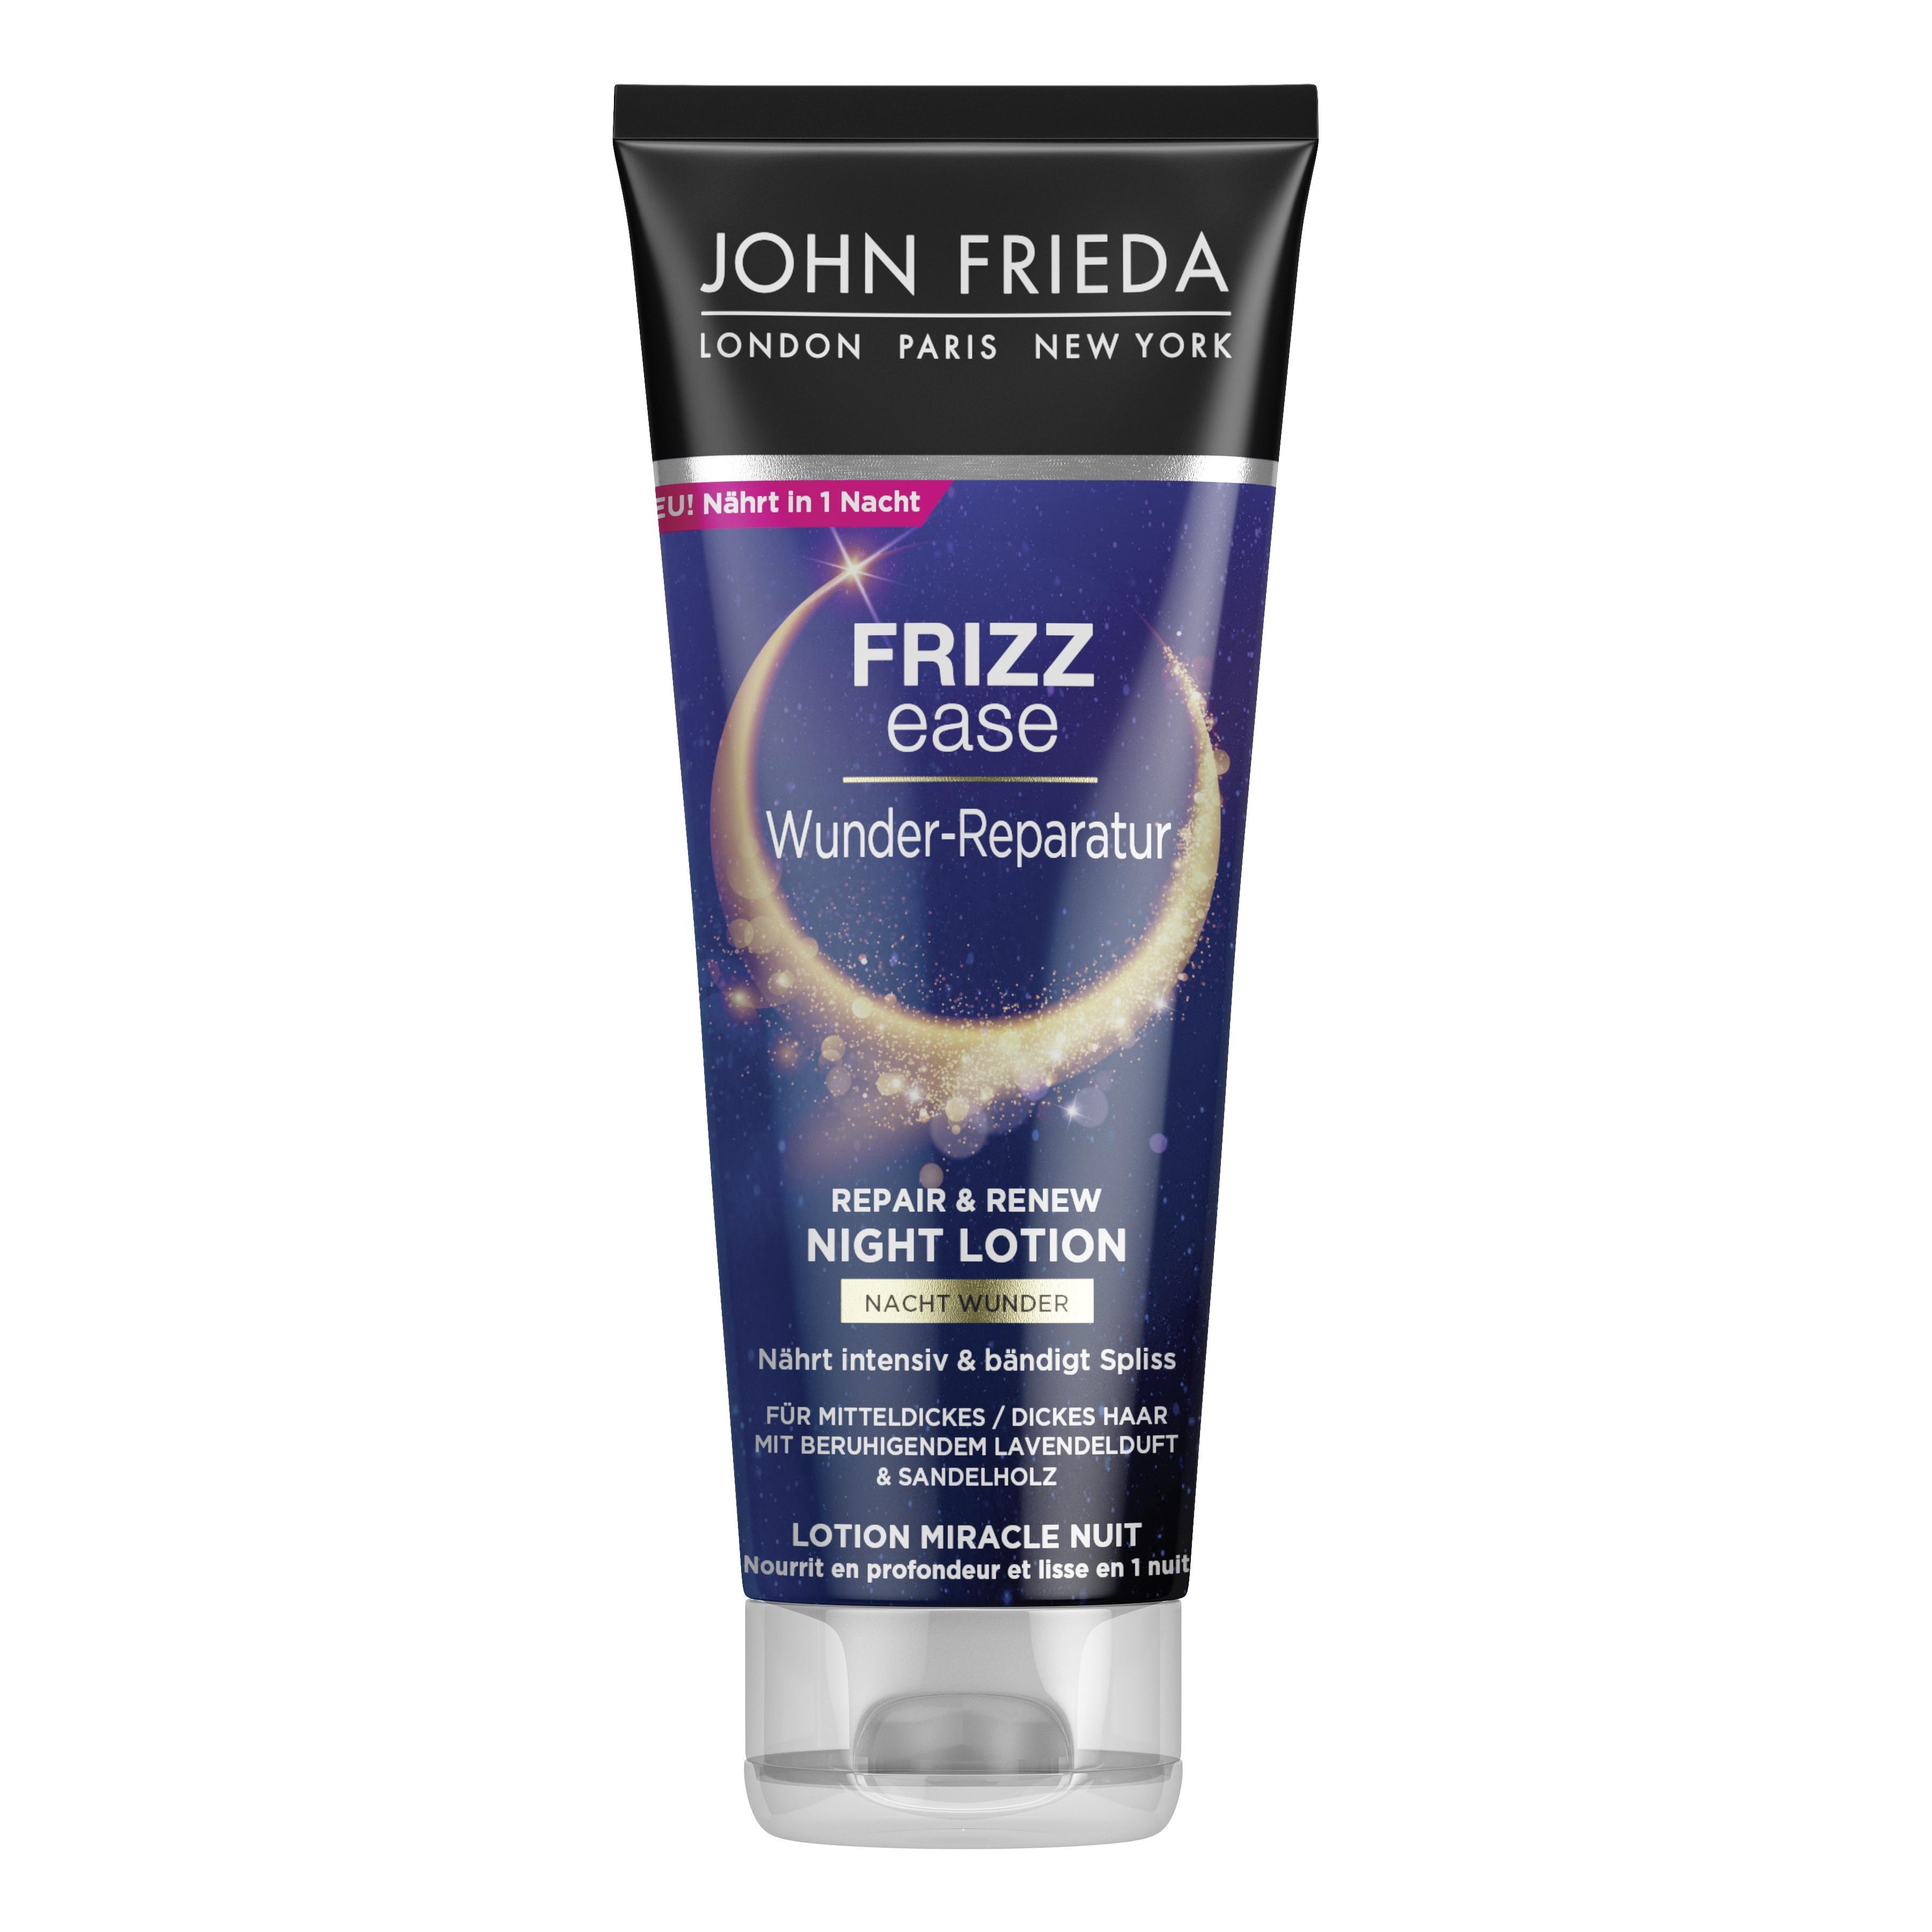 Frizz Ease - Wunder-Reparatur Nacht Wunder Lotion